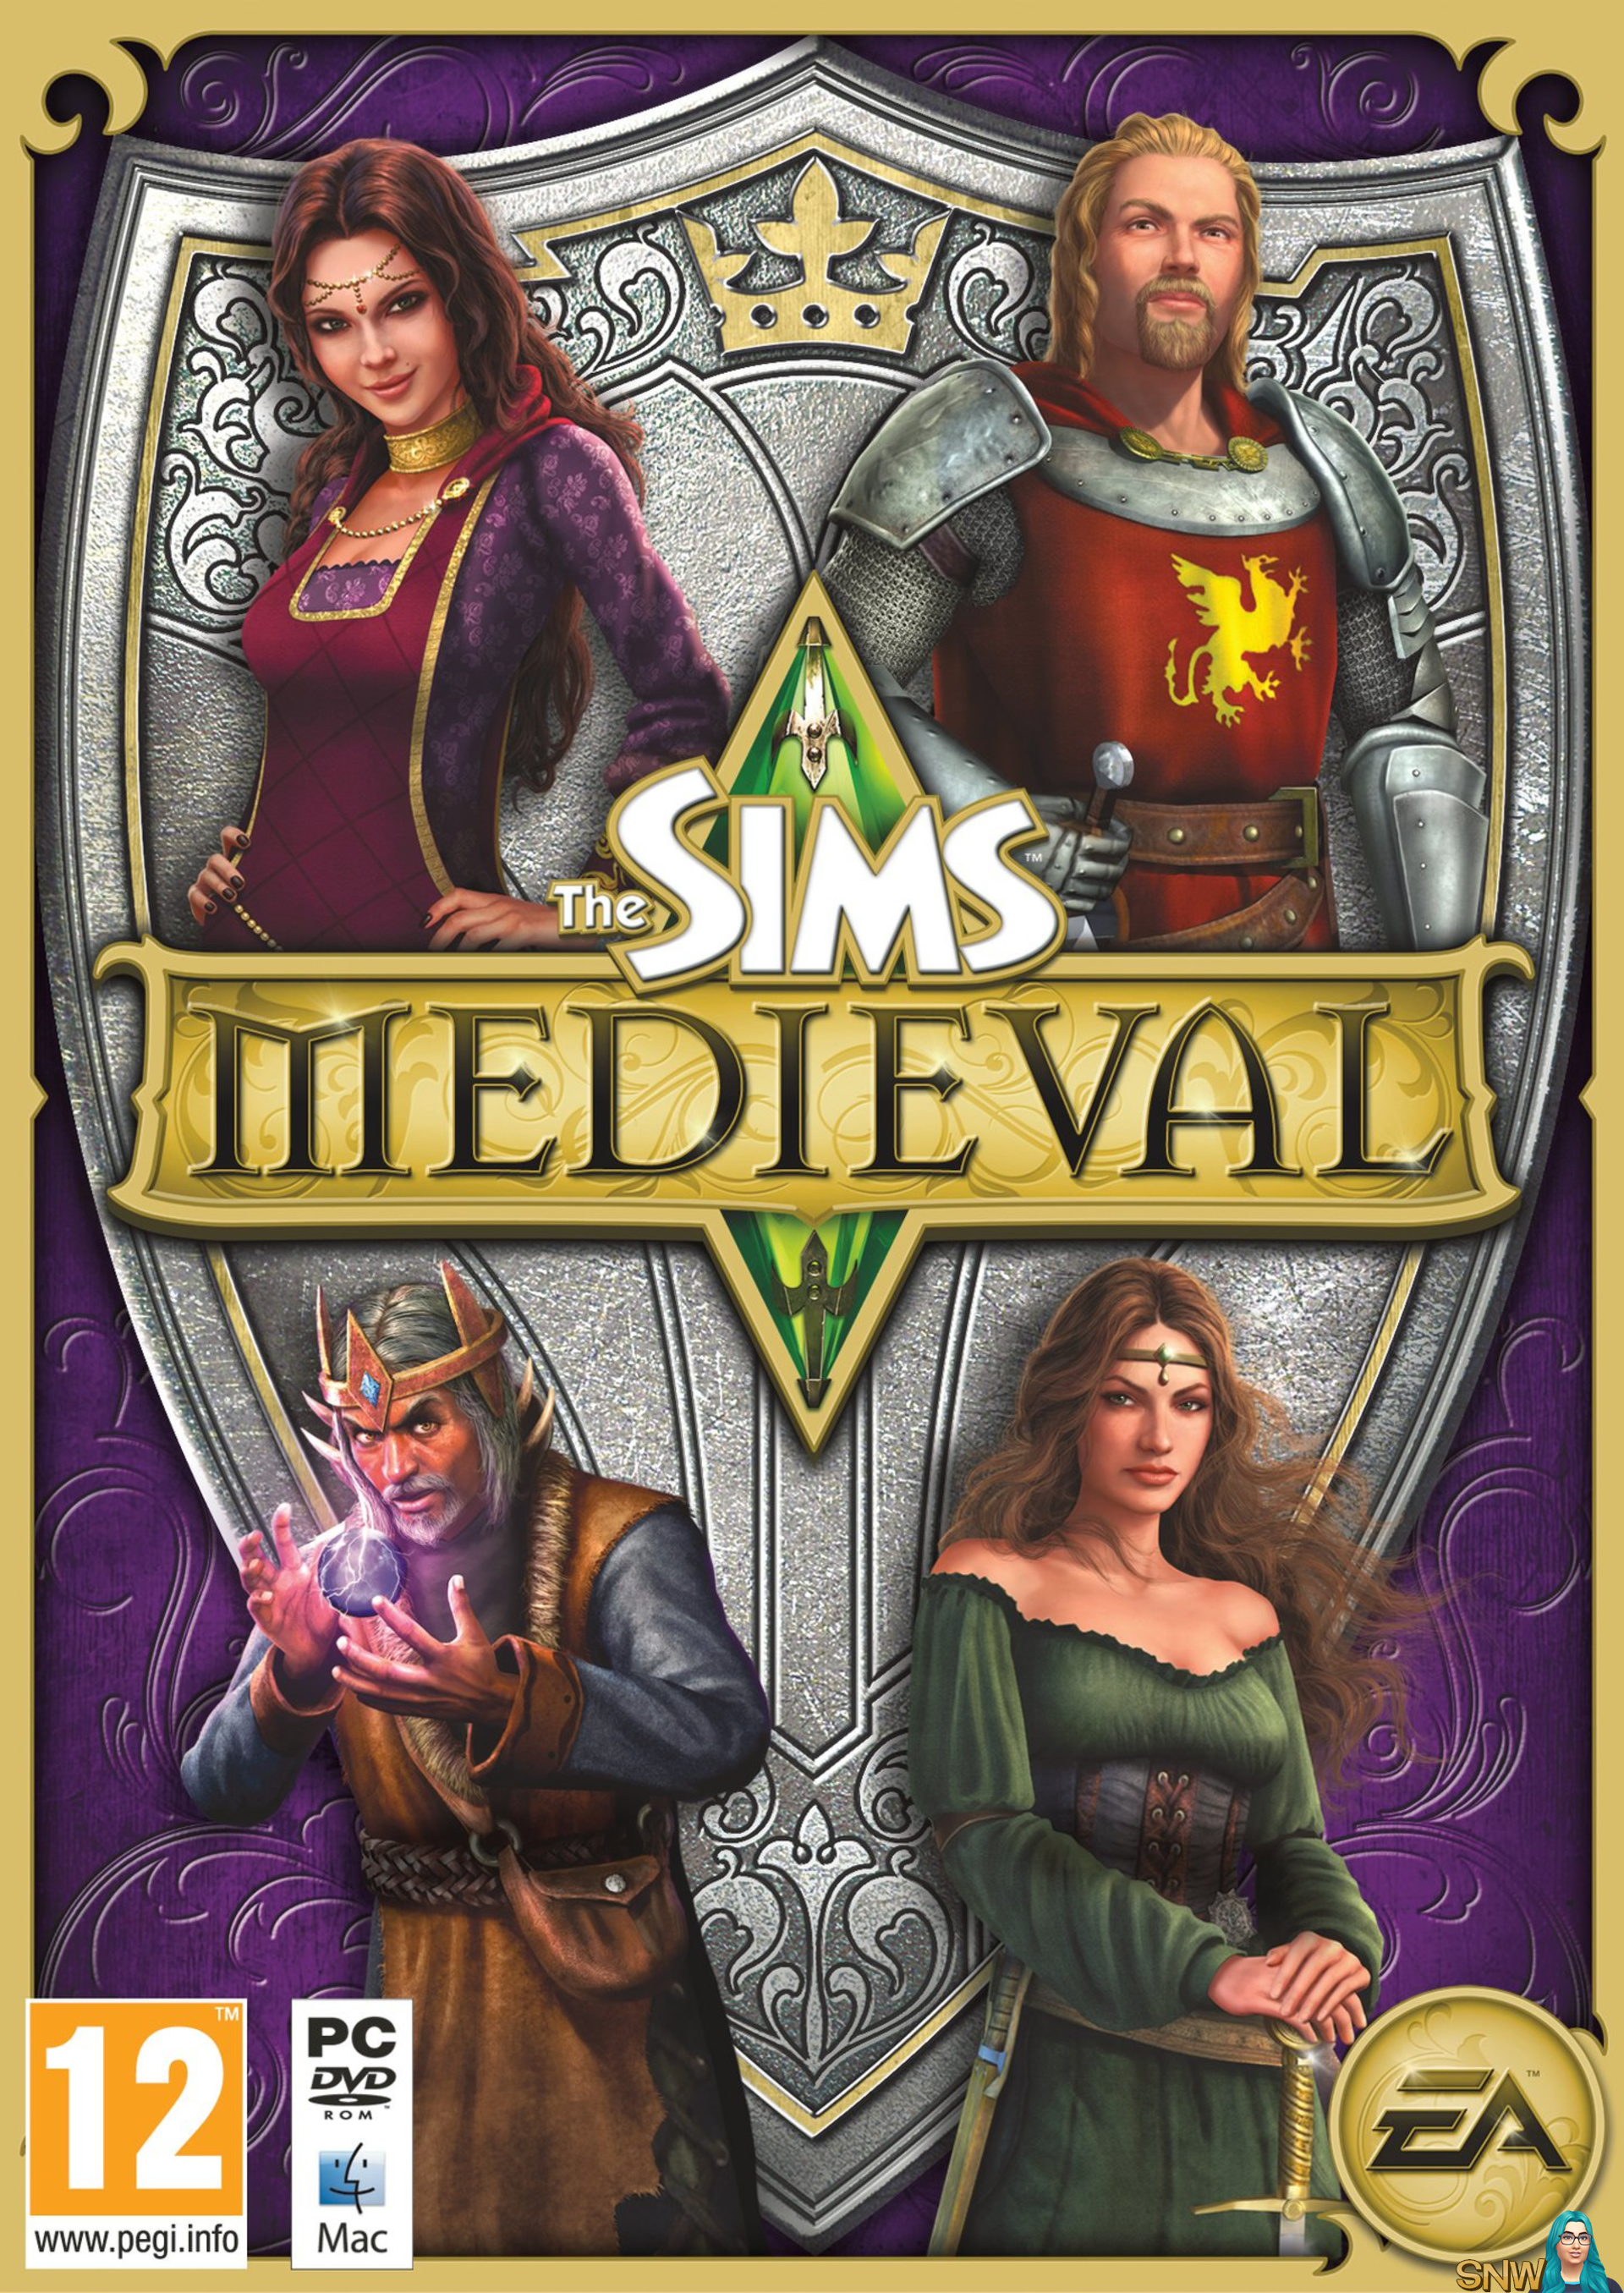 sims medieval deluxe vs special edition